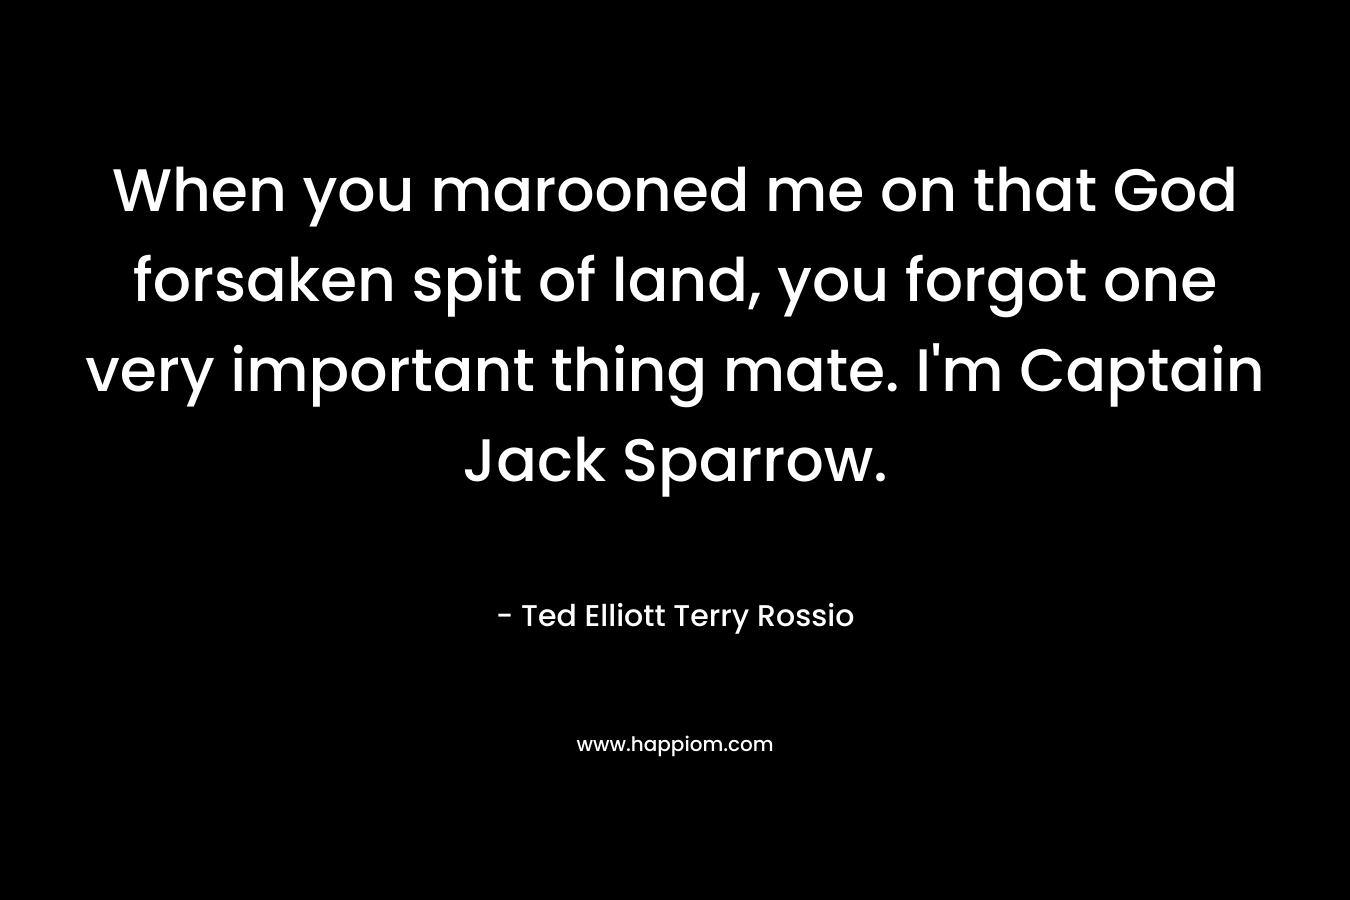 When you marooned me on that God forsaken spit of land, you forgot one very important thing mate. I’m Captain Jack Sparrow. – Ted Elliott  Terry Rossio